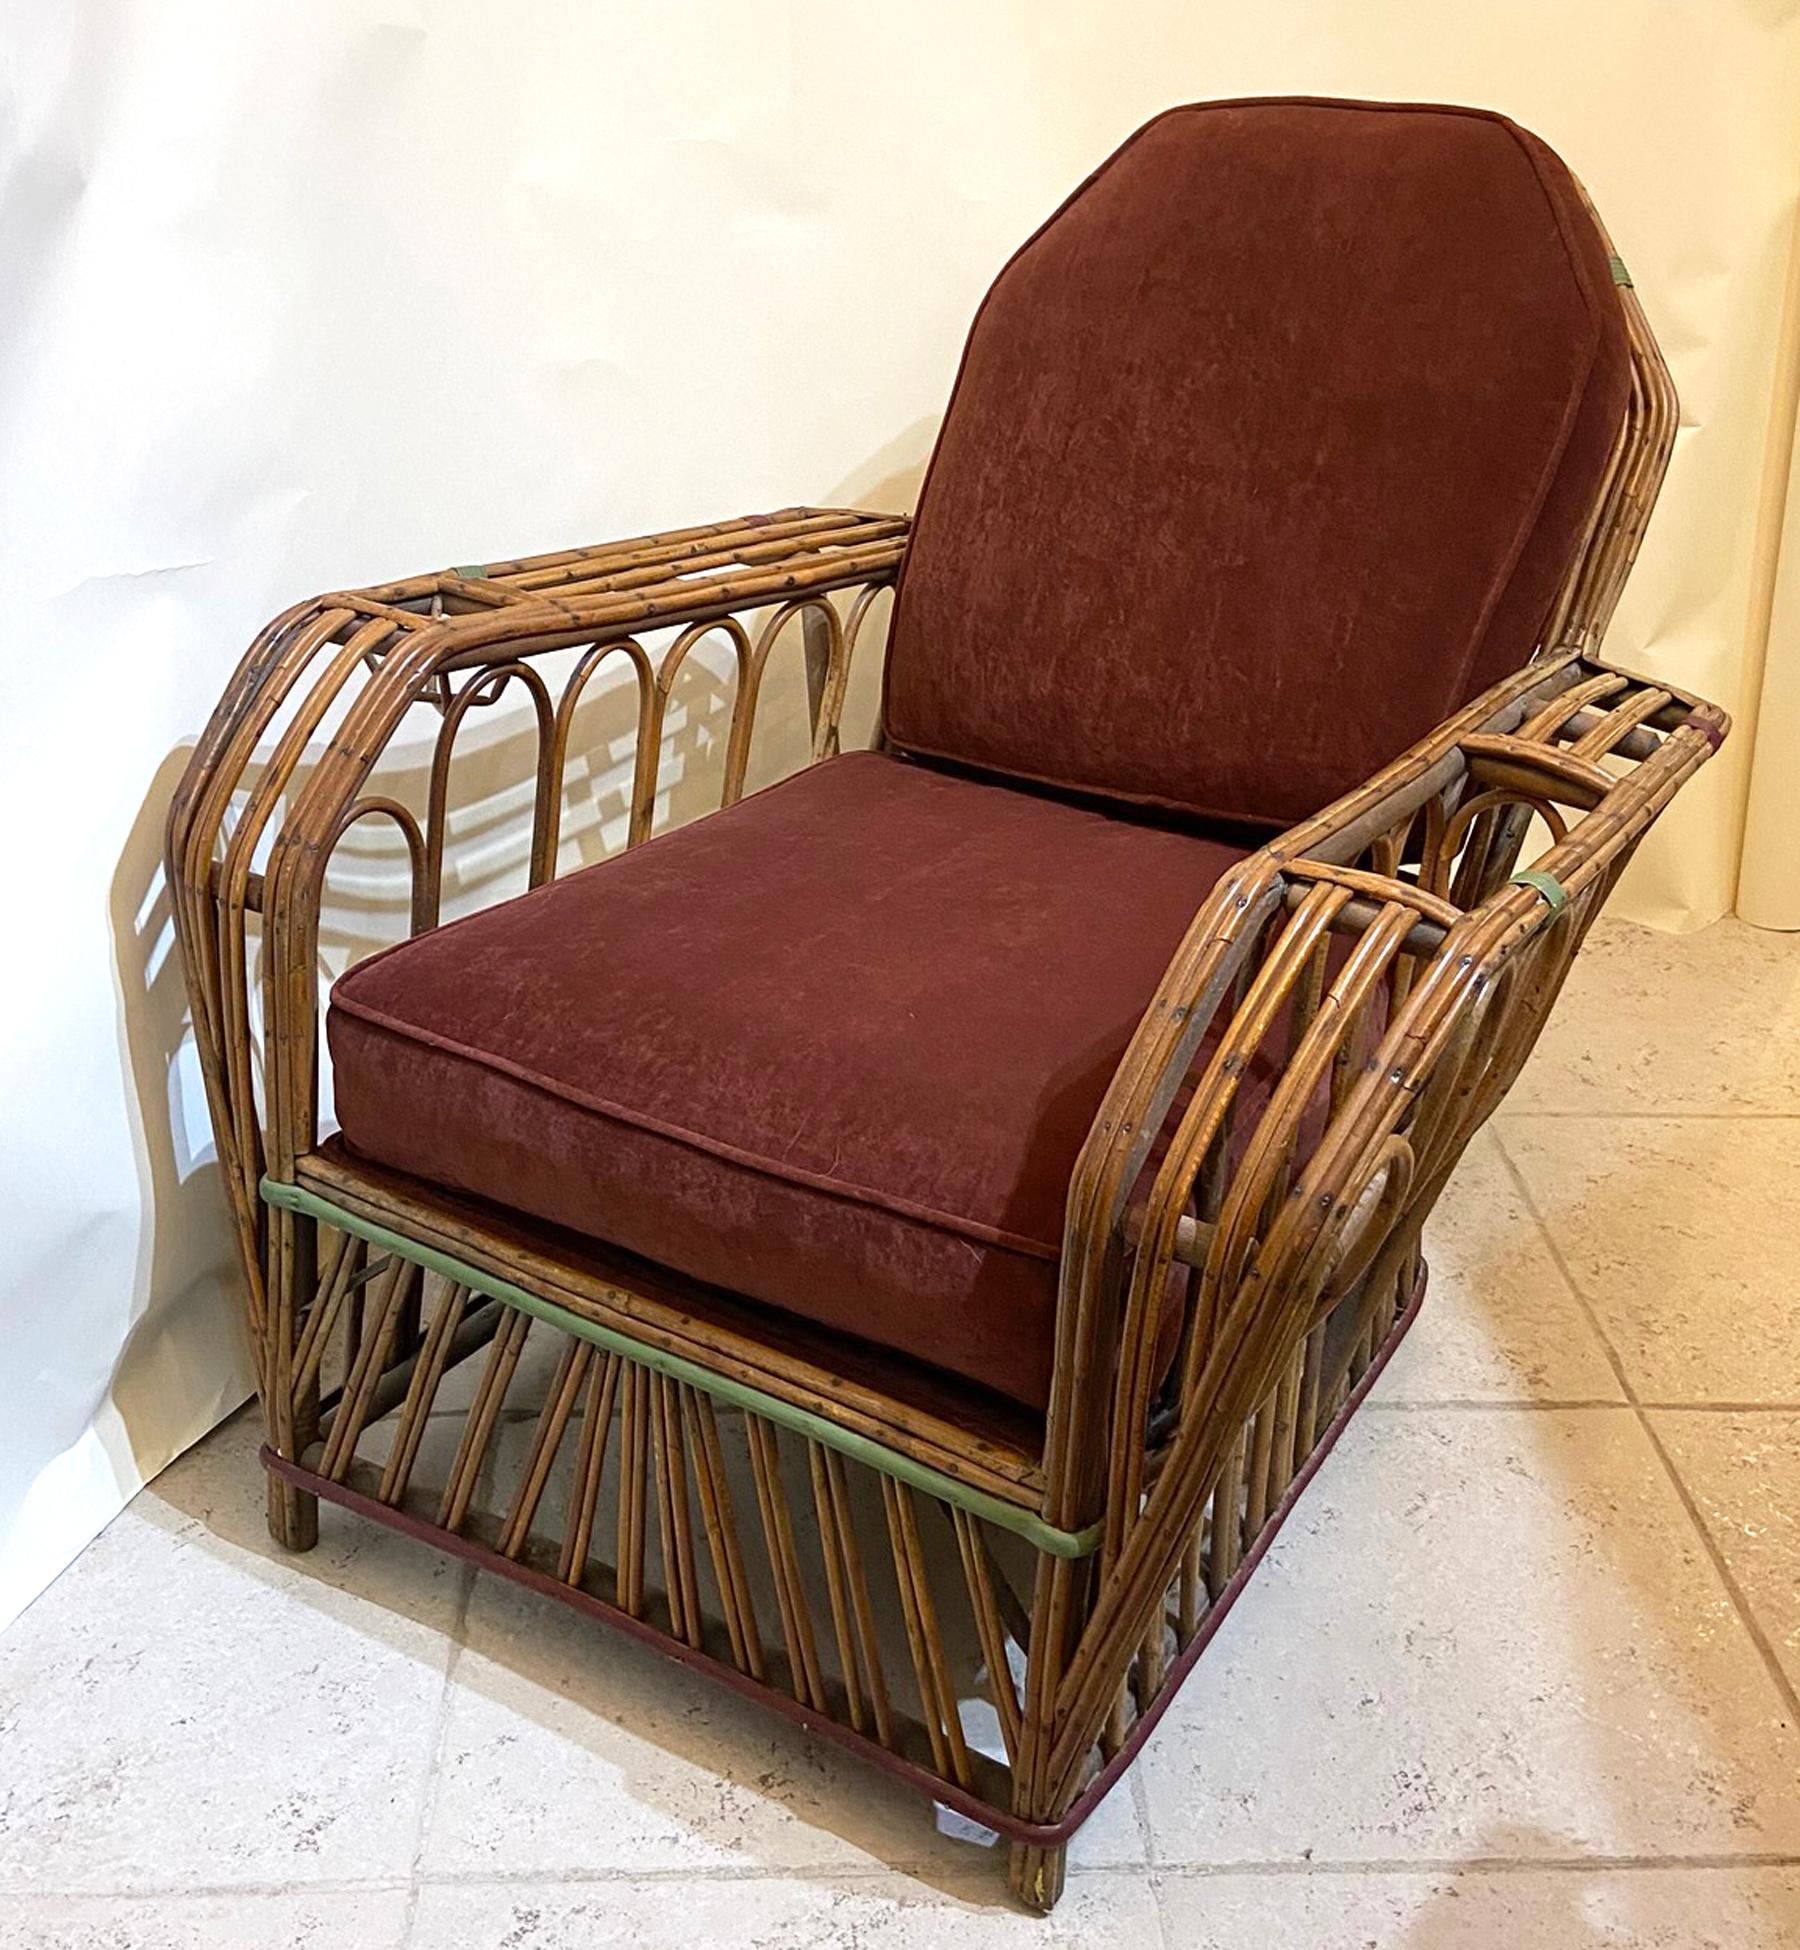 From late 1920s-early 1930s art Deco stick wicker lounge or club chairs. These chairs retain good original finish with original painted wraps. Rare to find this furniture with good original finish. Comfortable with updated cushions.